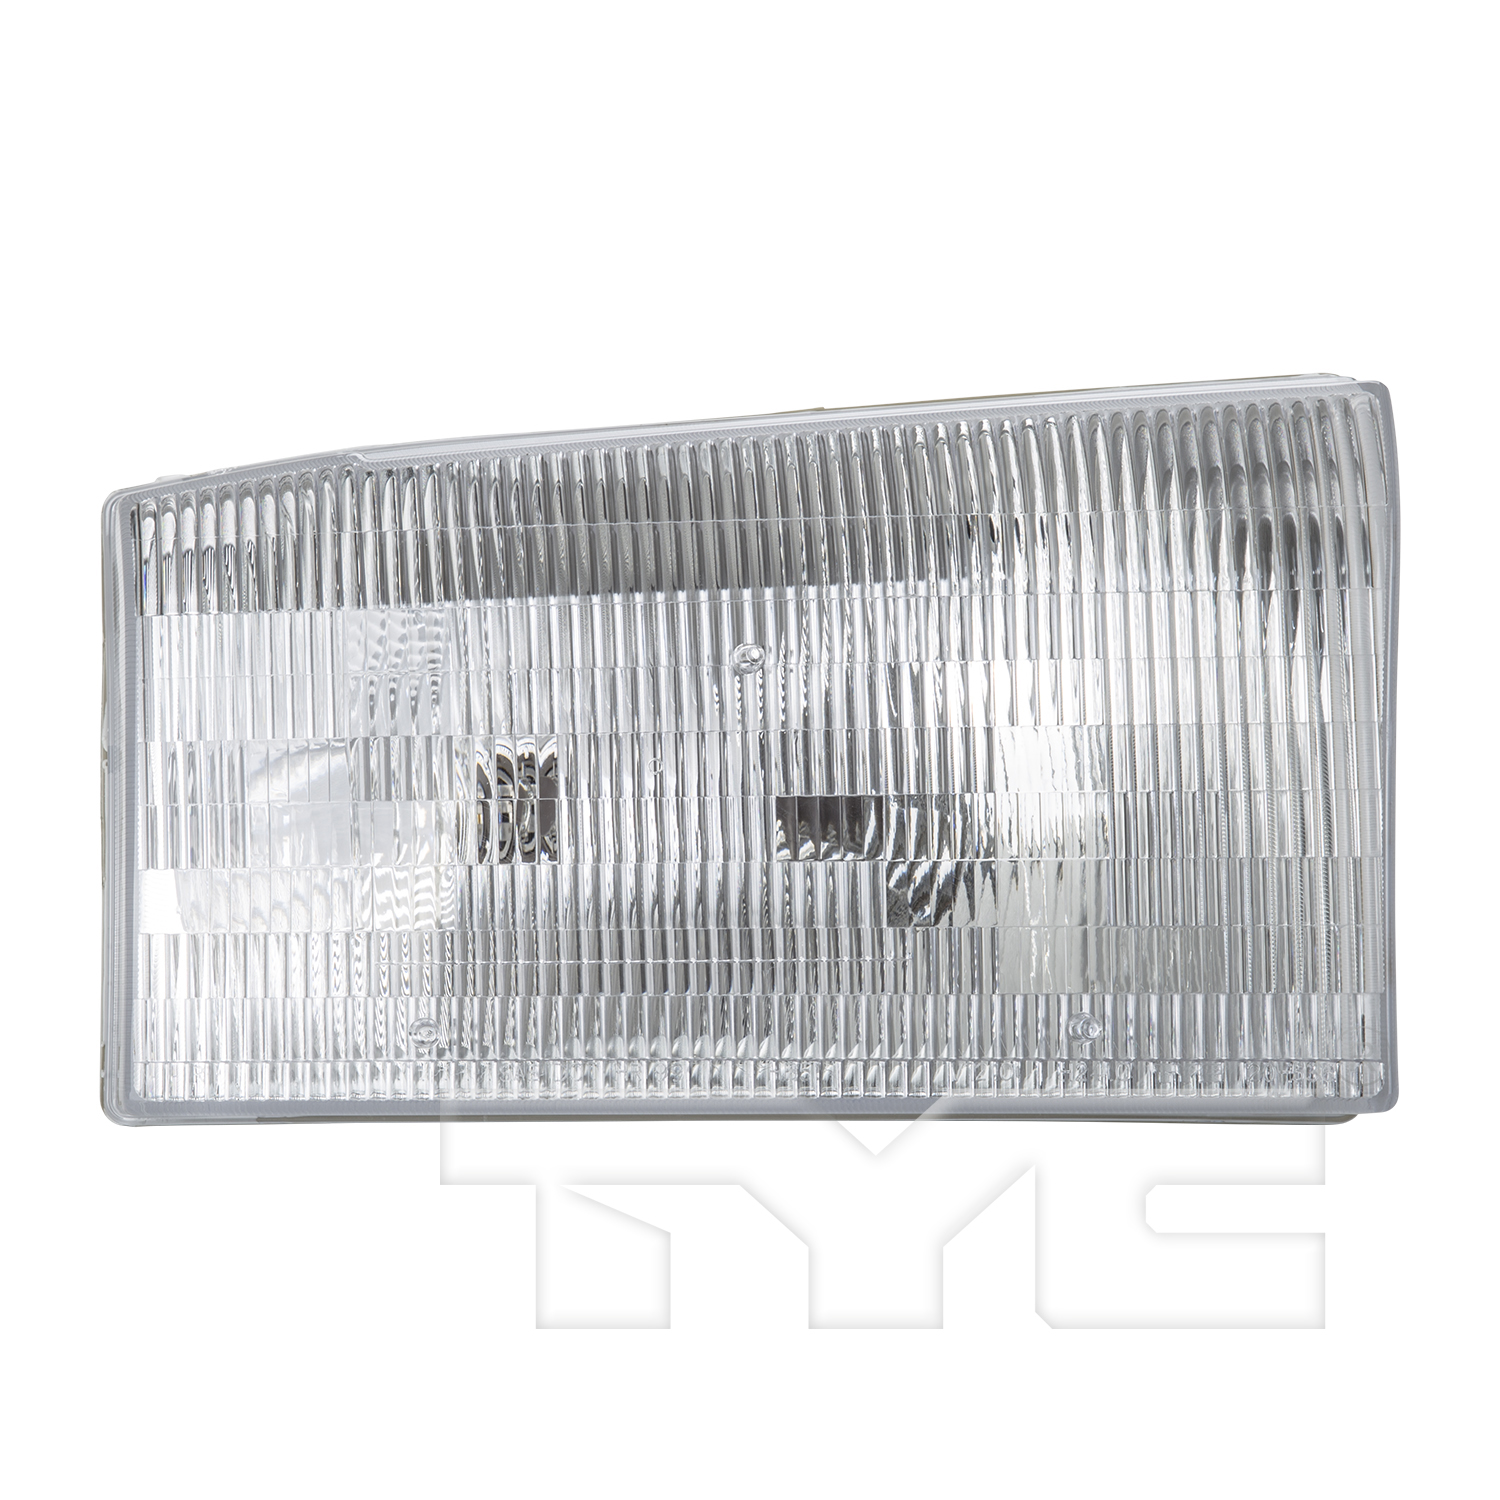 Aftermarket HEADLIGHTS for FORD - F-350 SUPER DUTY, F-350 SUPER DUTY,99-01,RT Headlamp assy composite